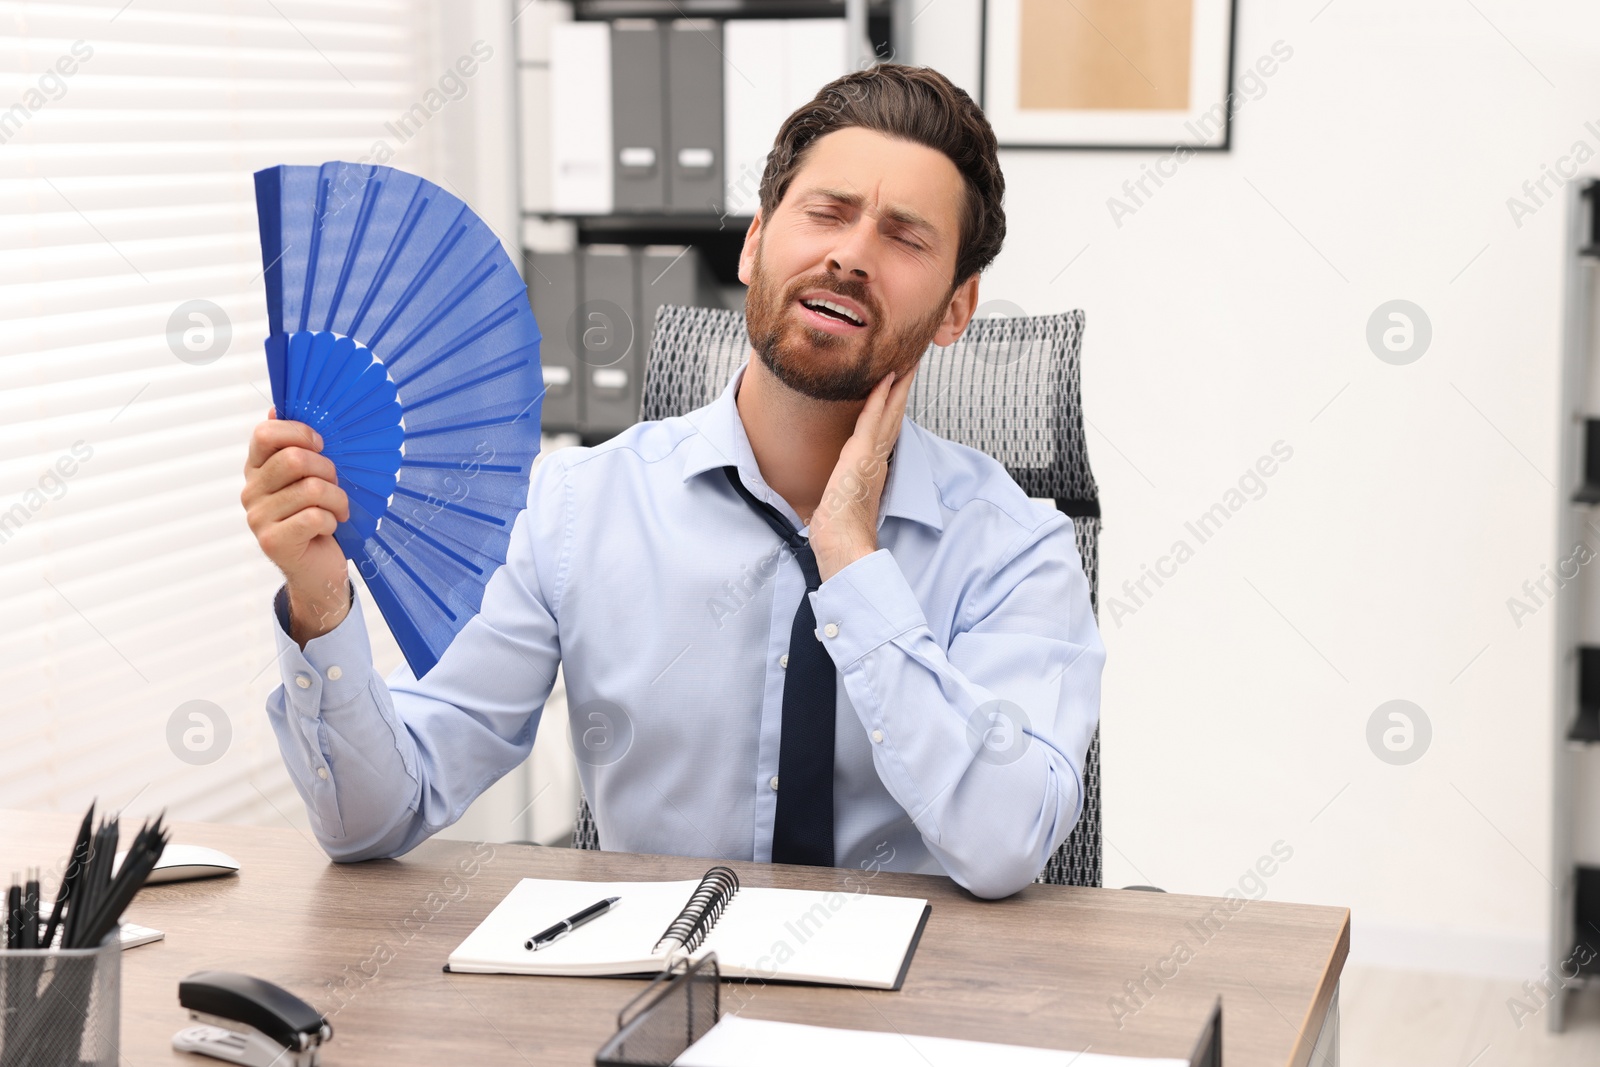 Photo of Bearded businessman waving blue hand fan to cool himself at table in office